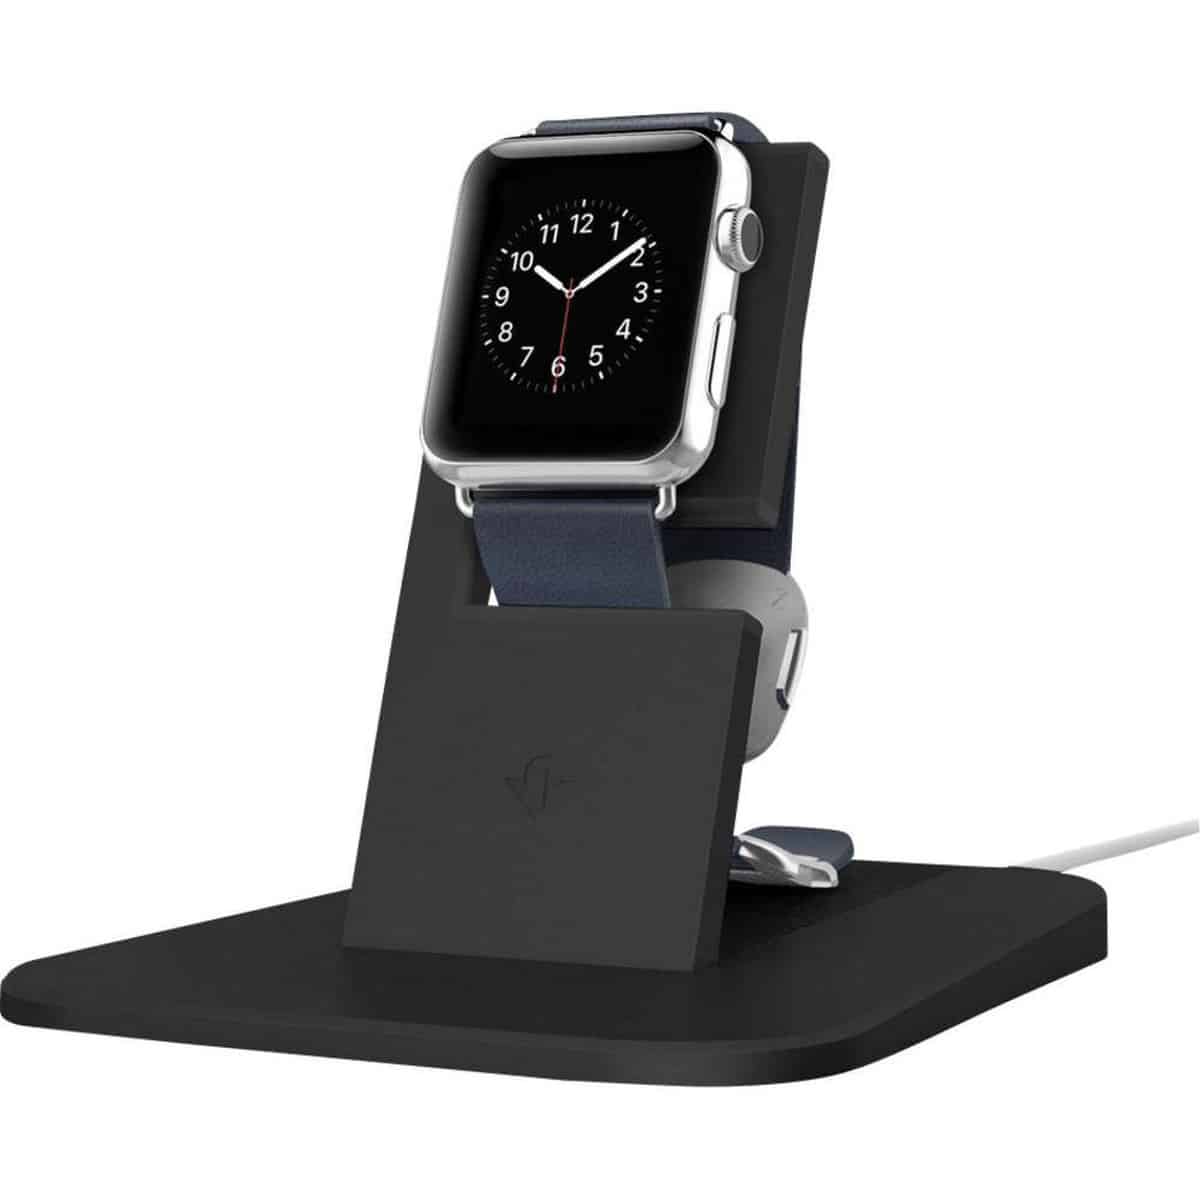 Twelve South HiRise | Apple Watch Accessories You Didn't Know You Needed